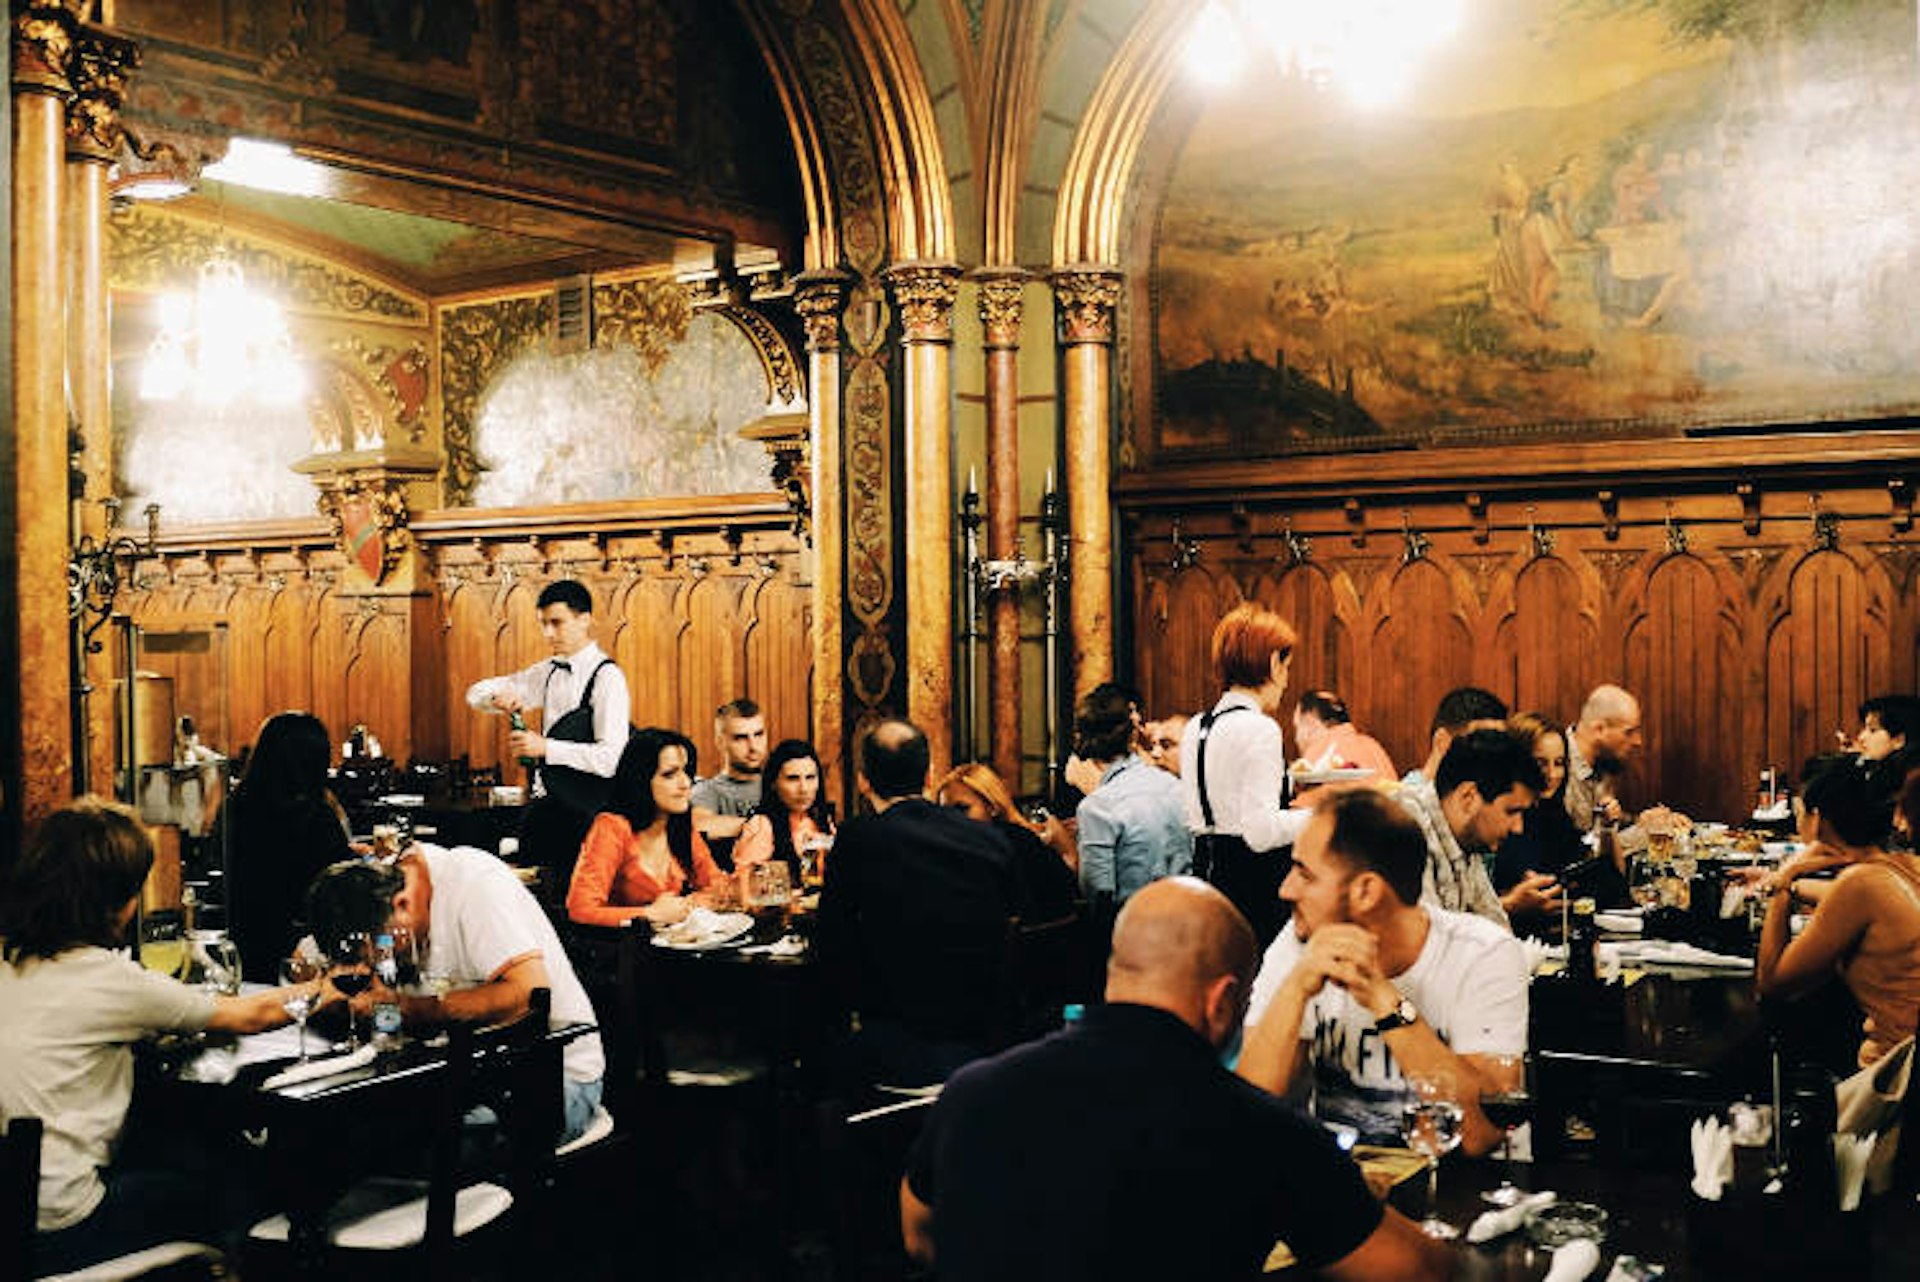 Caru’ cu Bere is a popular beer house in Bucharest. Image by Mark Baker / Lonely Planet